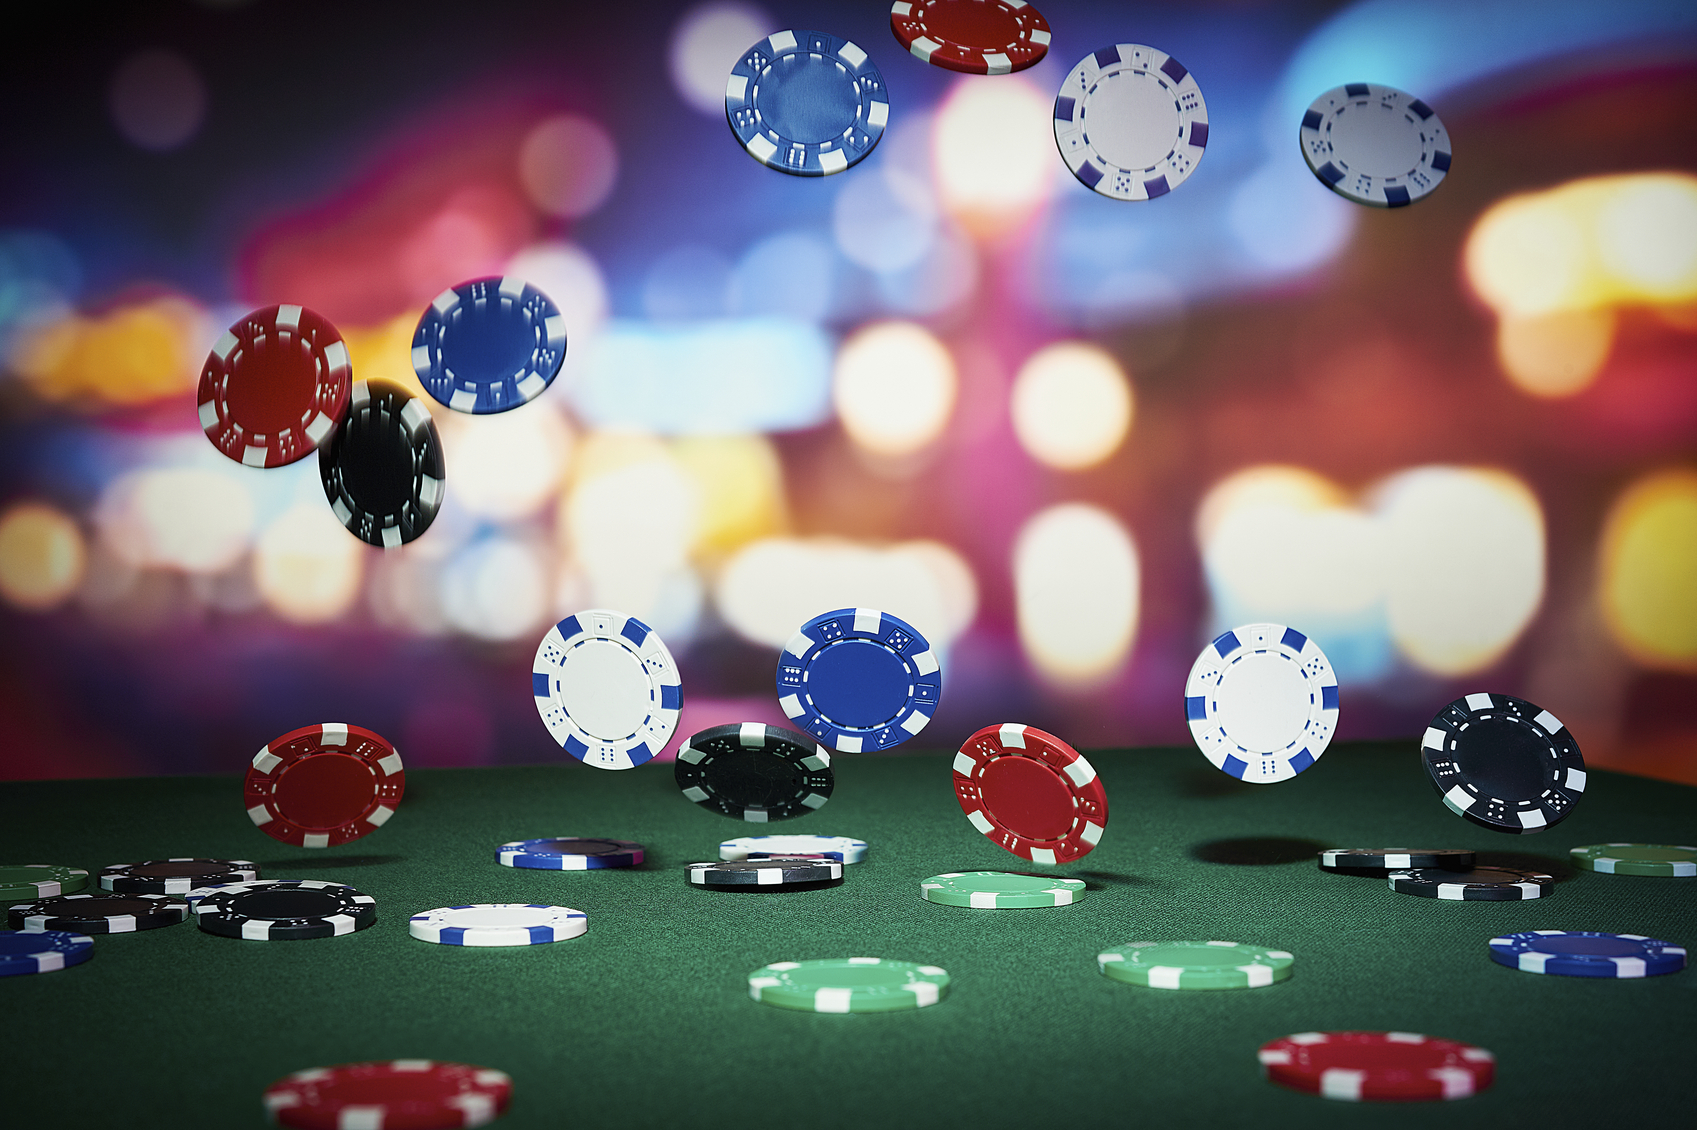 Cross-border liquidity pooling could give poker a shot in the arm